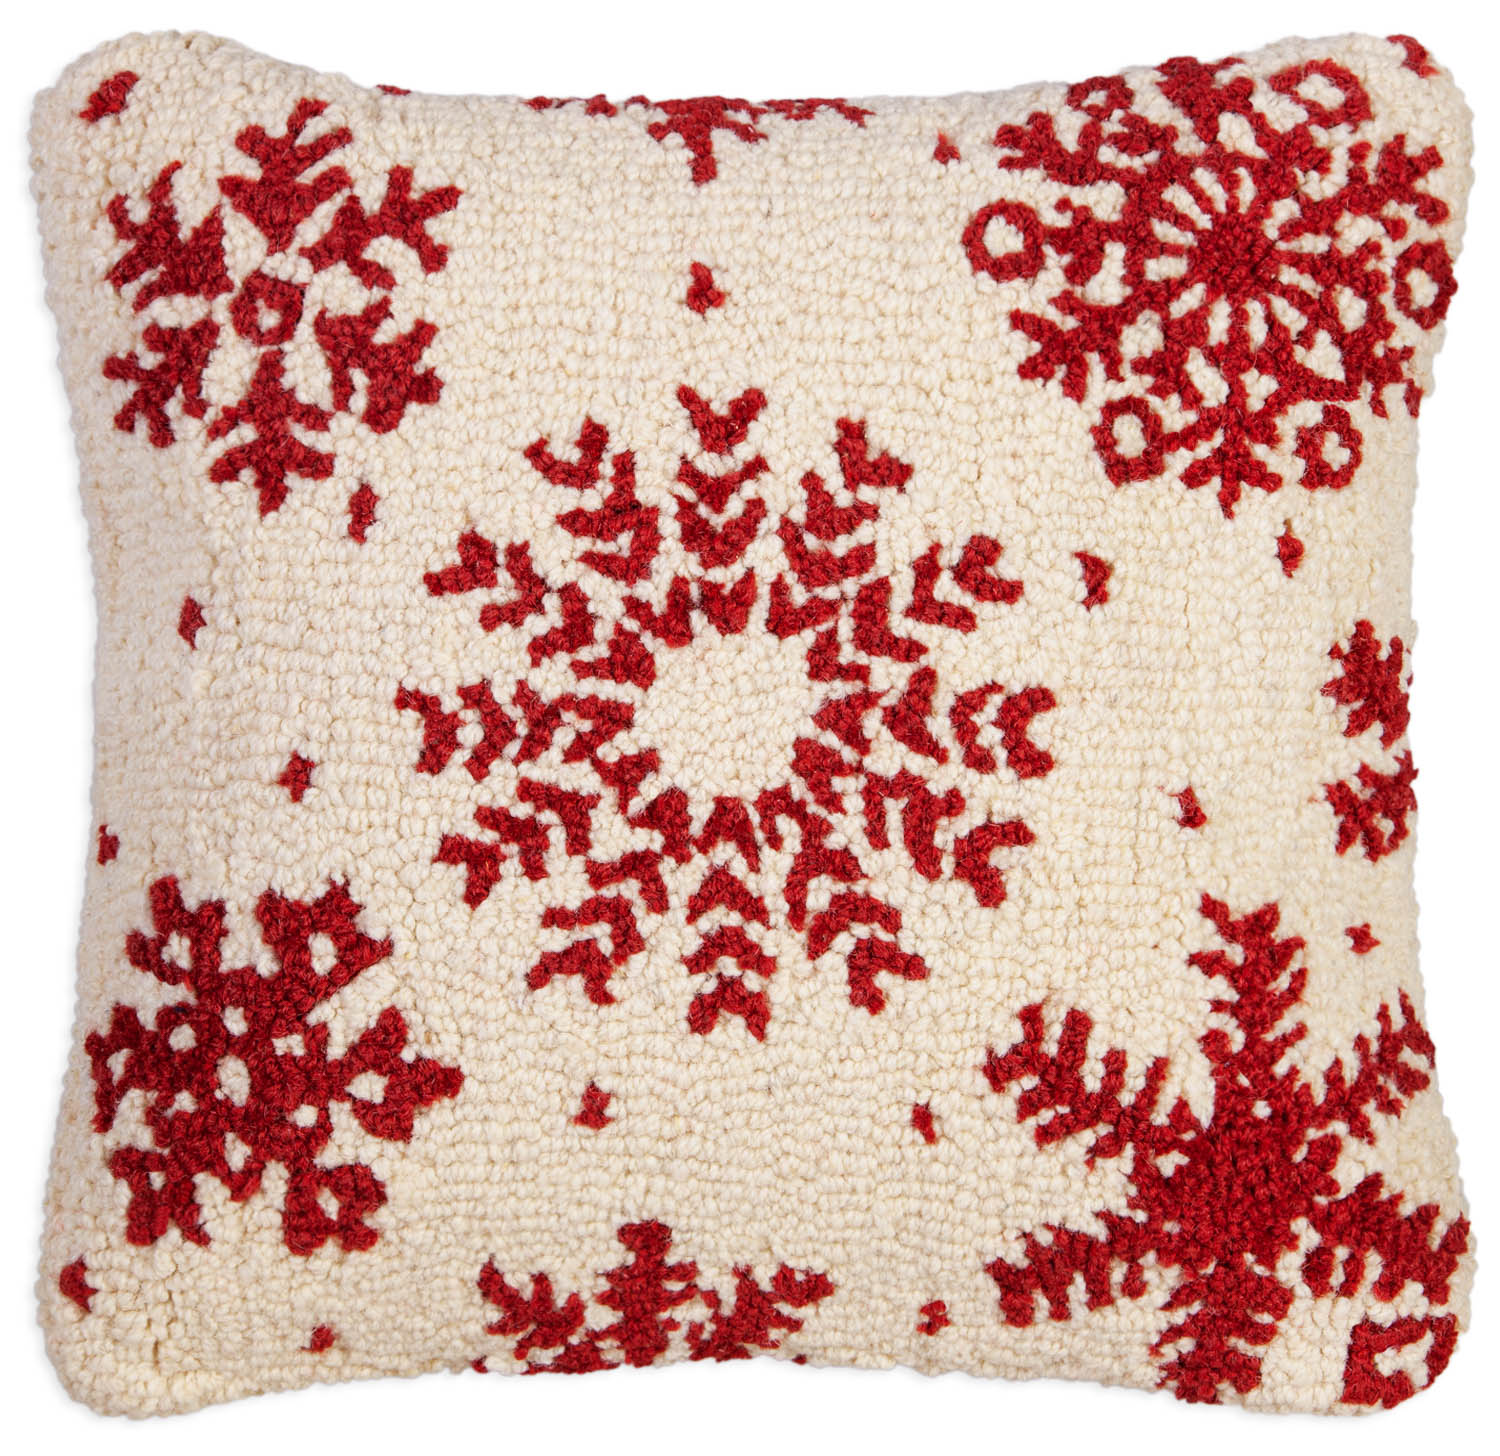 Chandler 4 Corners 18 Hooked Cabin Pillow, Frosty Flakes - Red / White , 18 x 18